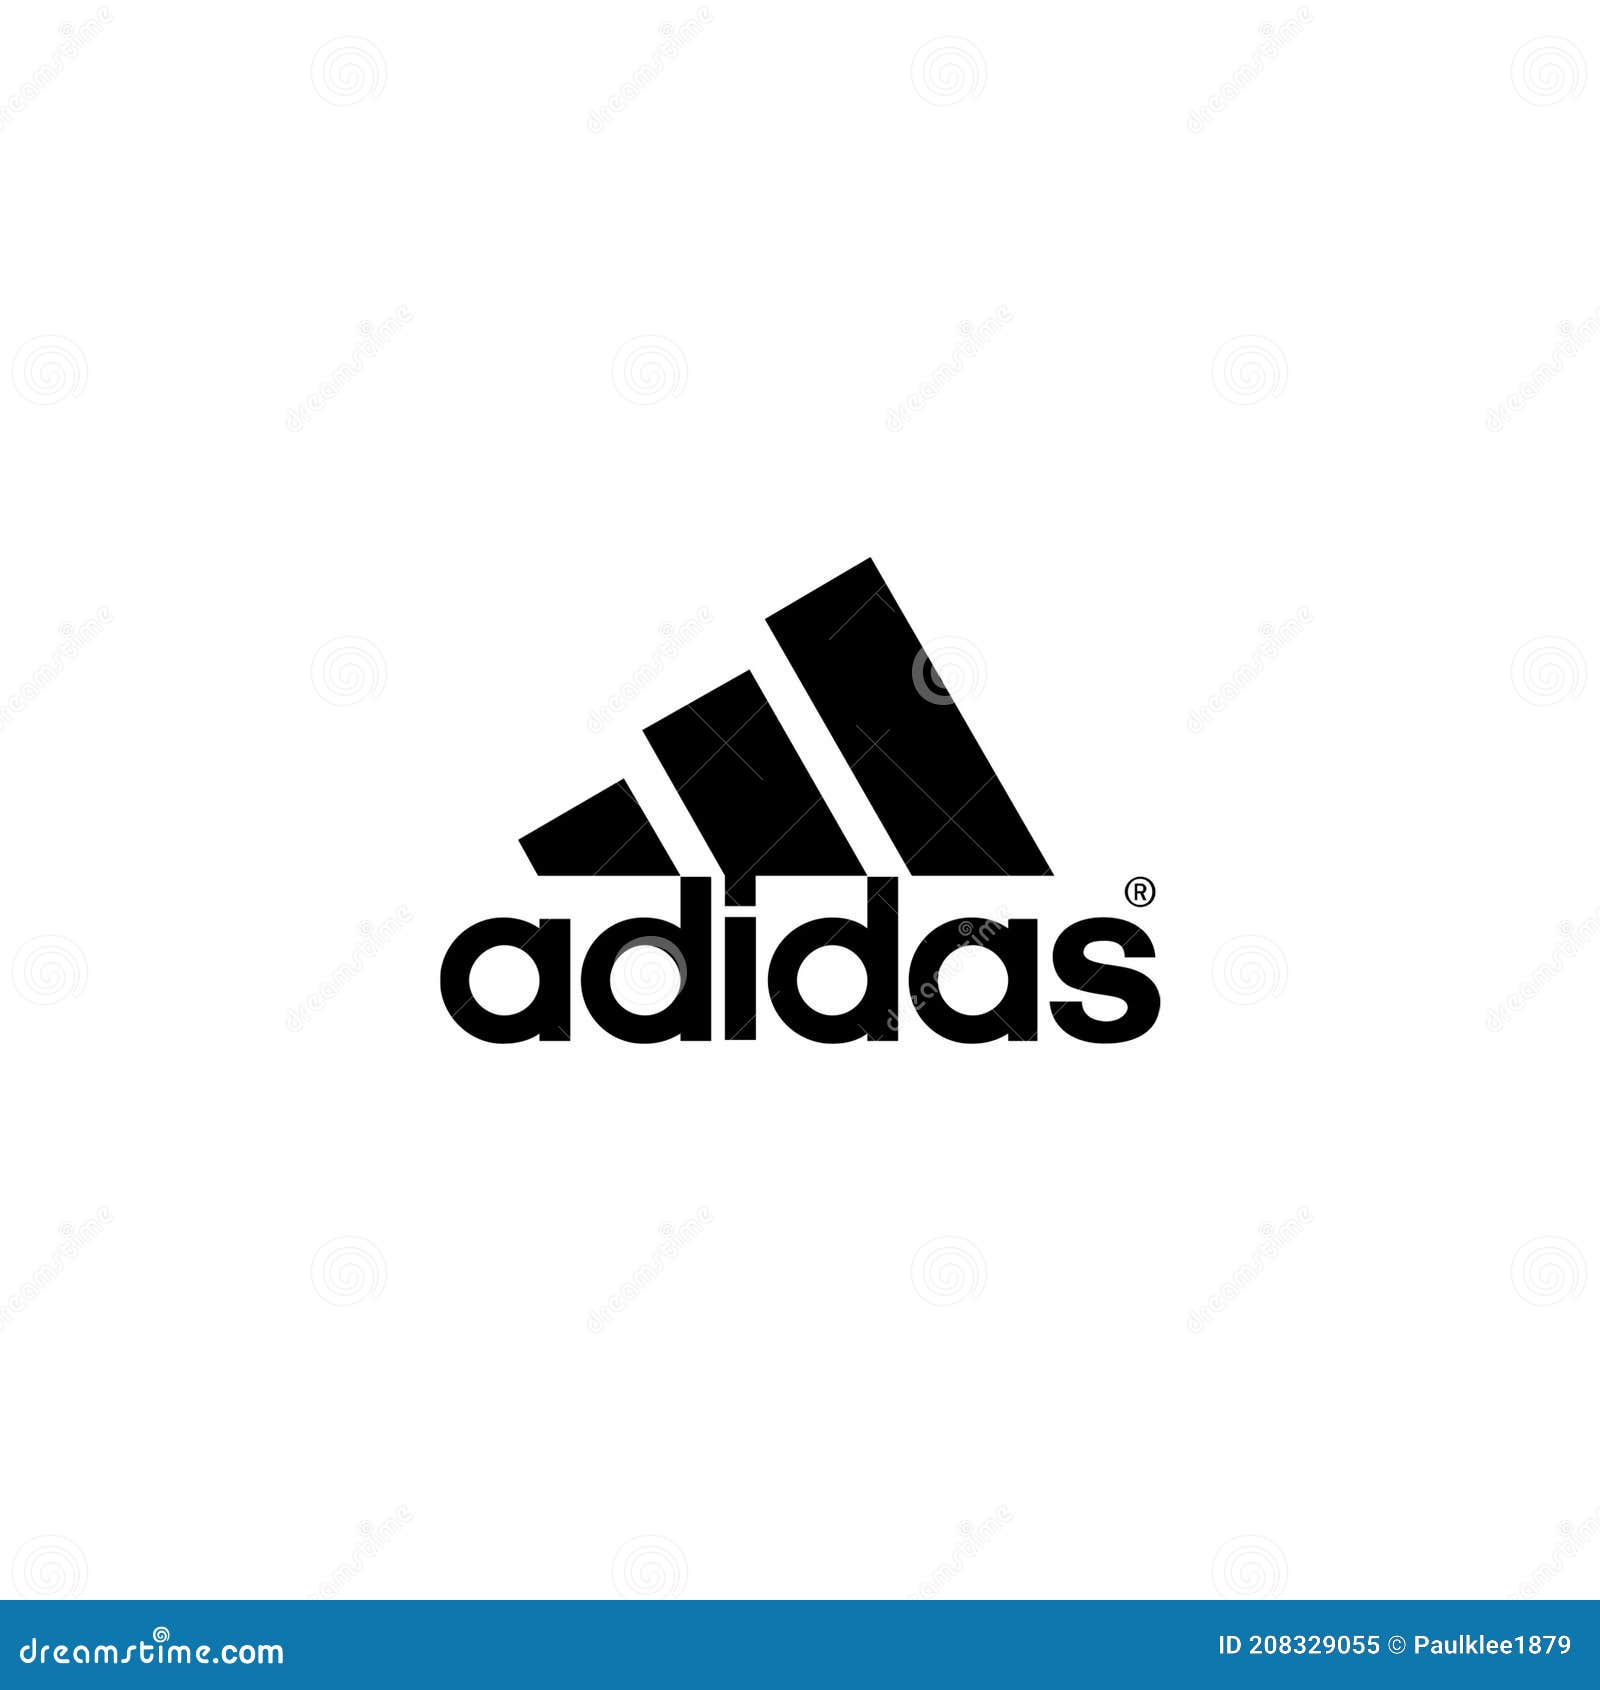 Adidas Logo Editorial Illustrative on White Background Editorial Image - paper, vector: